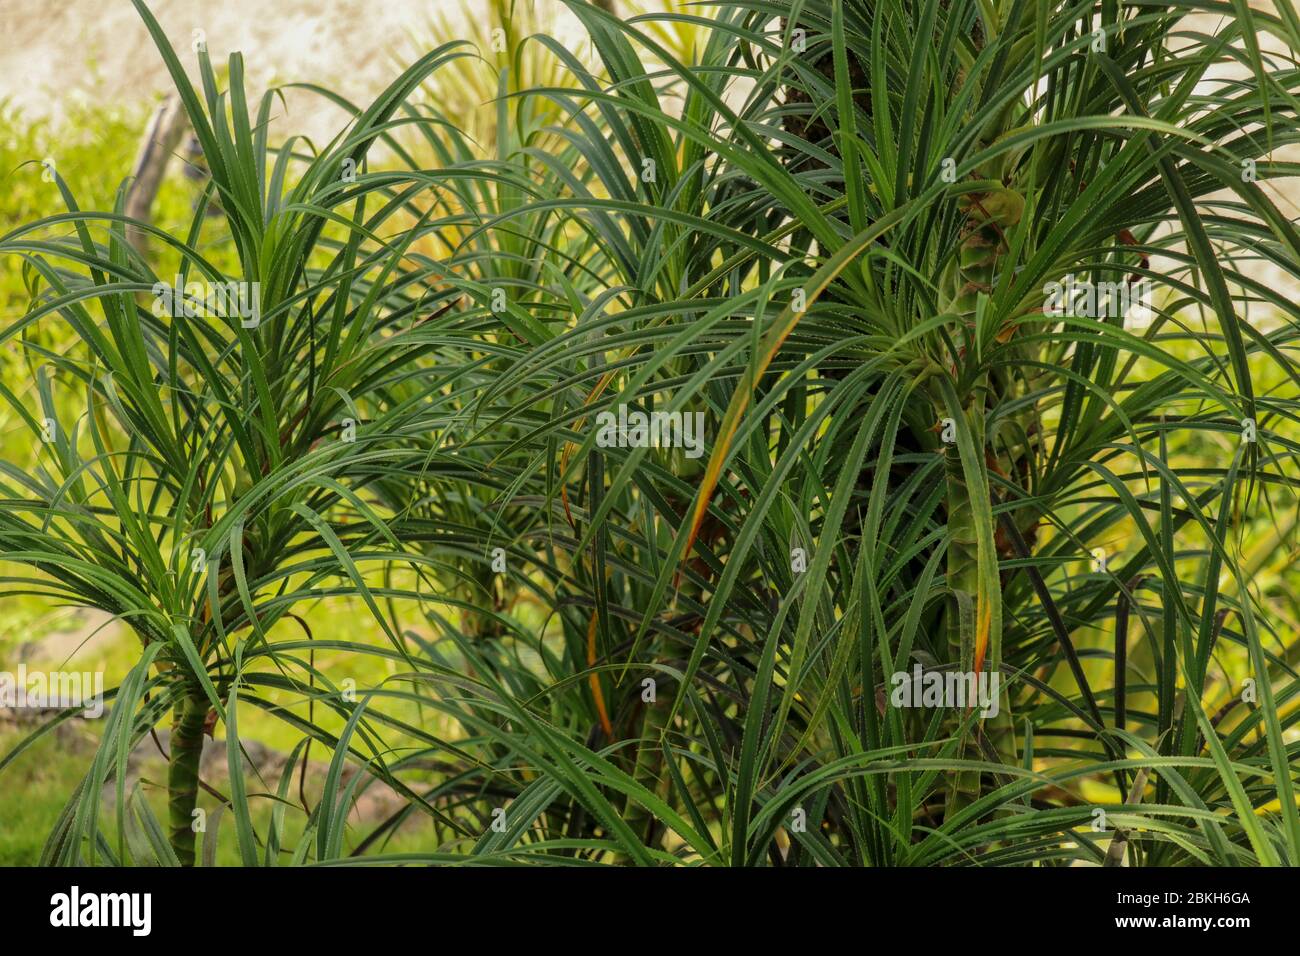 Youg plant Pandanus Tectorius, Pandanus Odoratissimus tree with natural sunlight in the morning. Herbal use for diuretic and relieve a fever on side v Stock Photo